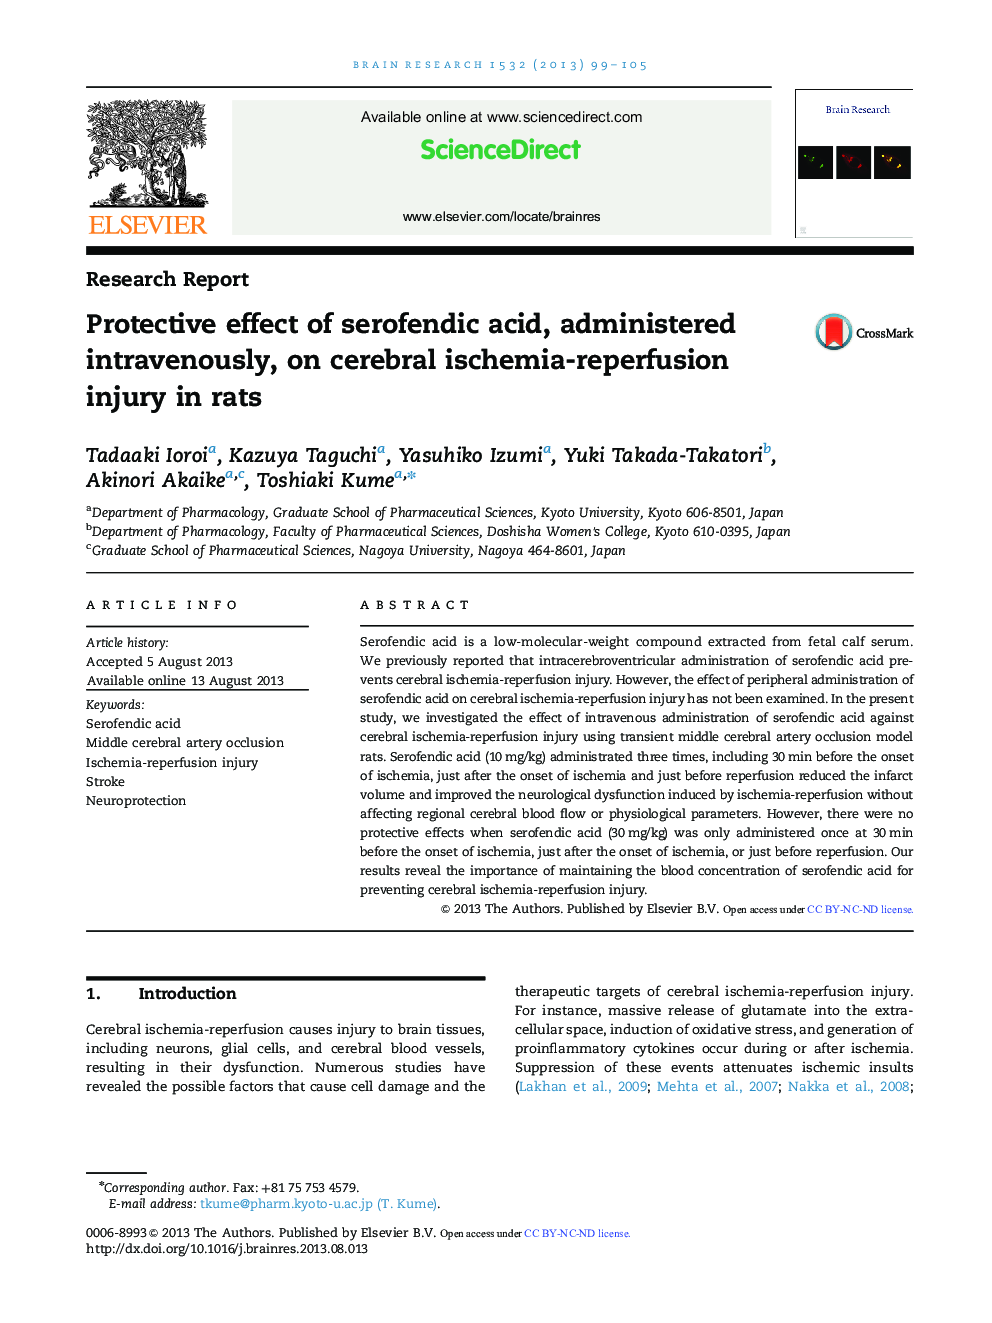 Research ReportProtective effect of serofendic acid, administered intravenously, on cerebral ischemia-reperfusion injury in rats